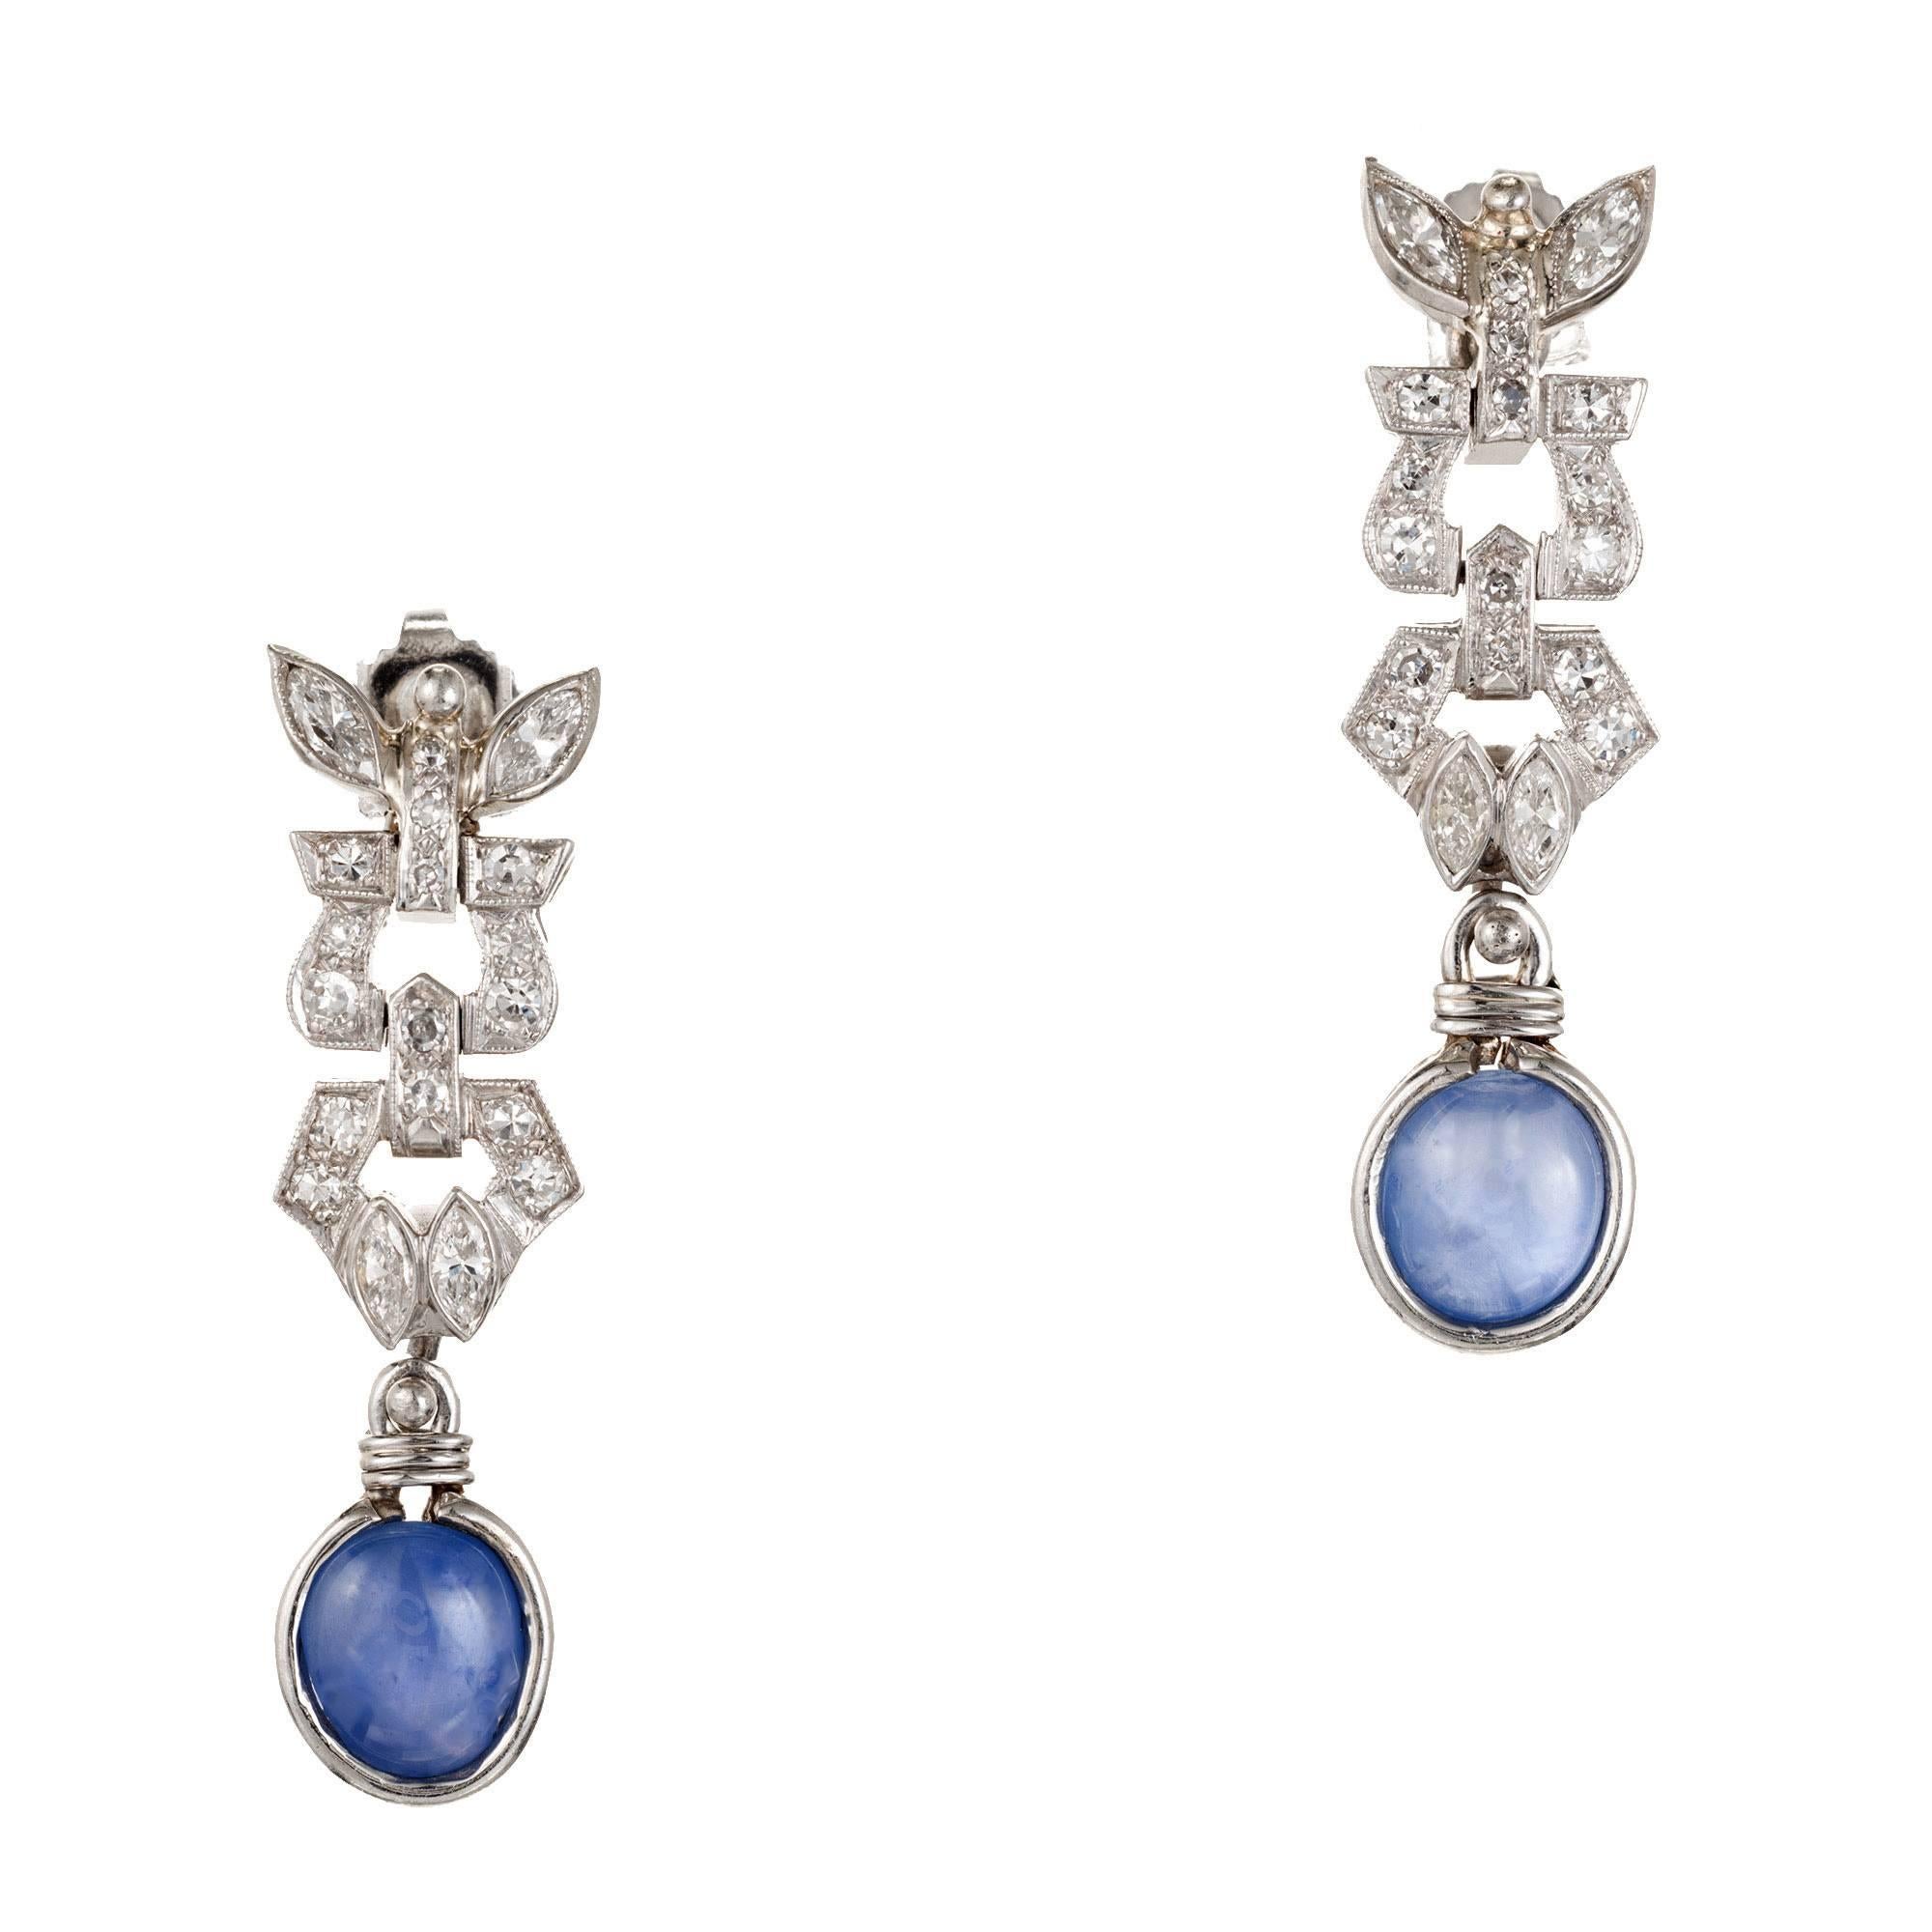 4.75 Carat sapphire and diamond dangle earrings. Made in platinum with two oval cabochon sapphires and 38 round accent diamonds.  

2 cabochon sapphires 4.75cts, medium blue color.
38 round diamonds .75cts, VS2, H.
Tested Platinum.
10.3 grams.
1 3/8